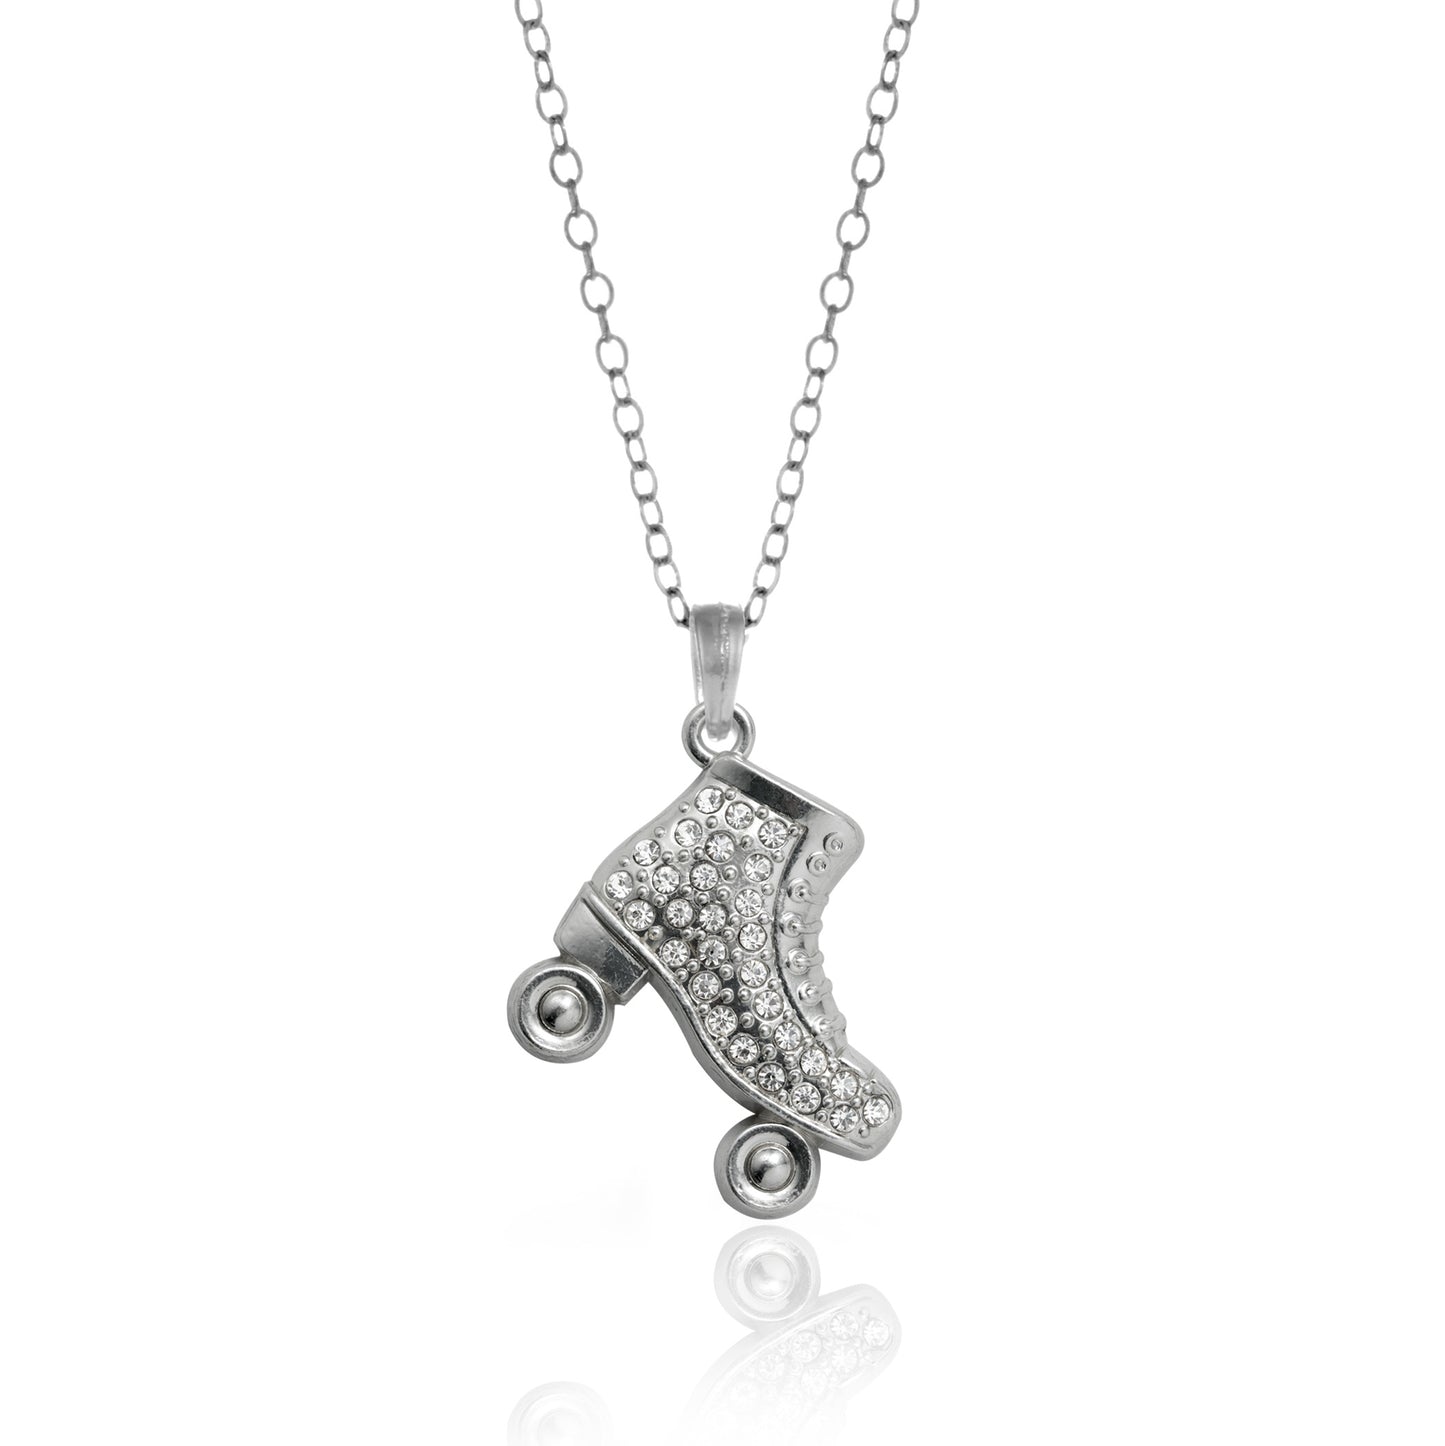 Silver Roller Skate Charm Classic Necklace